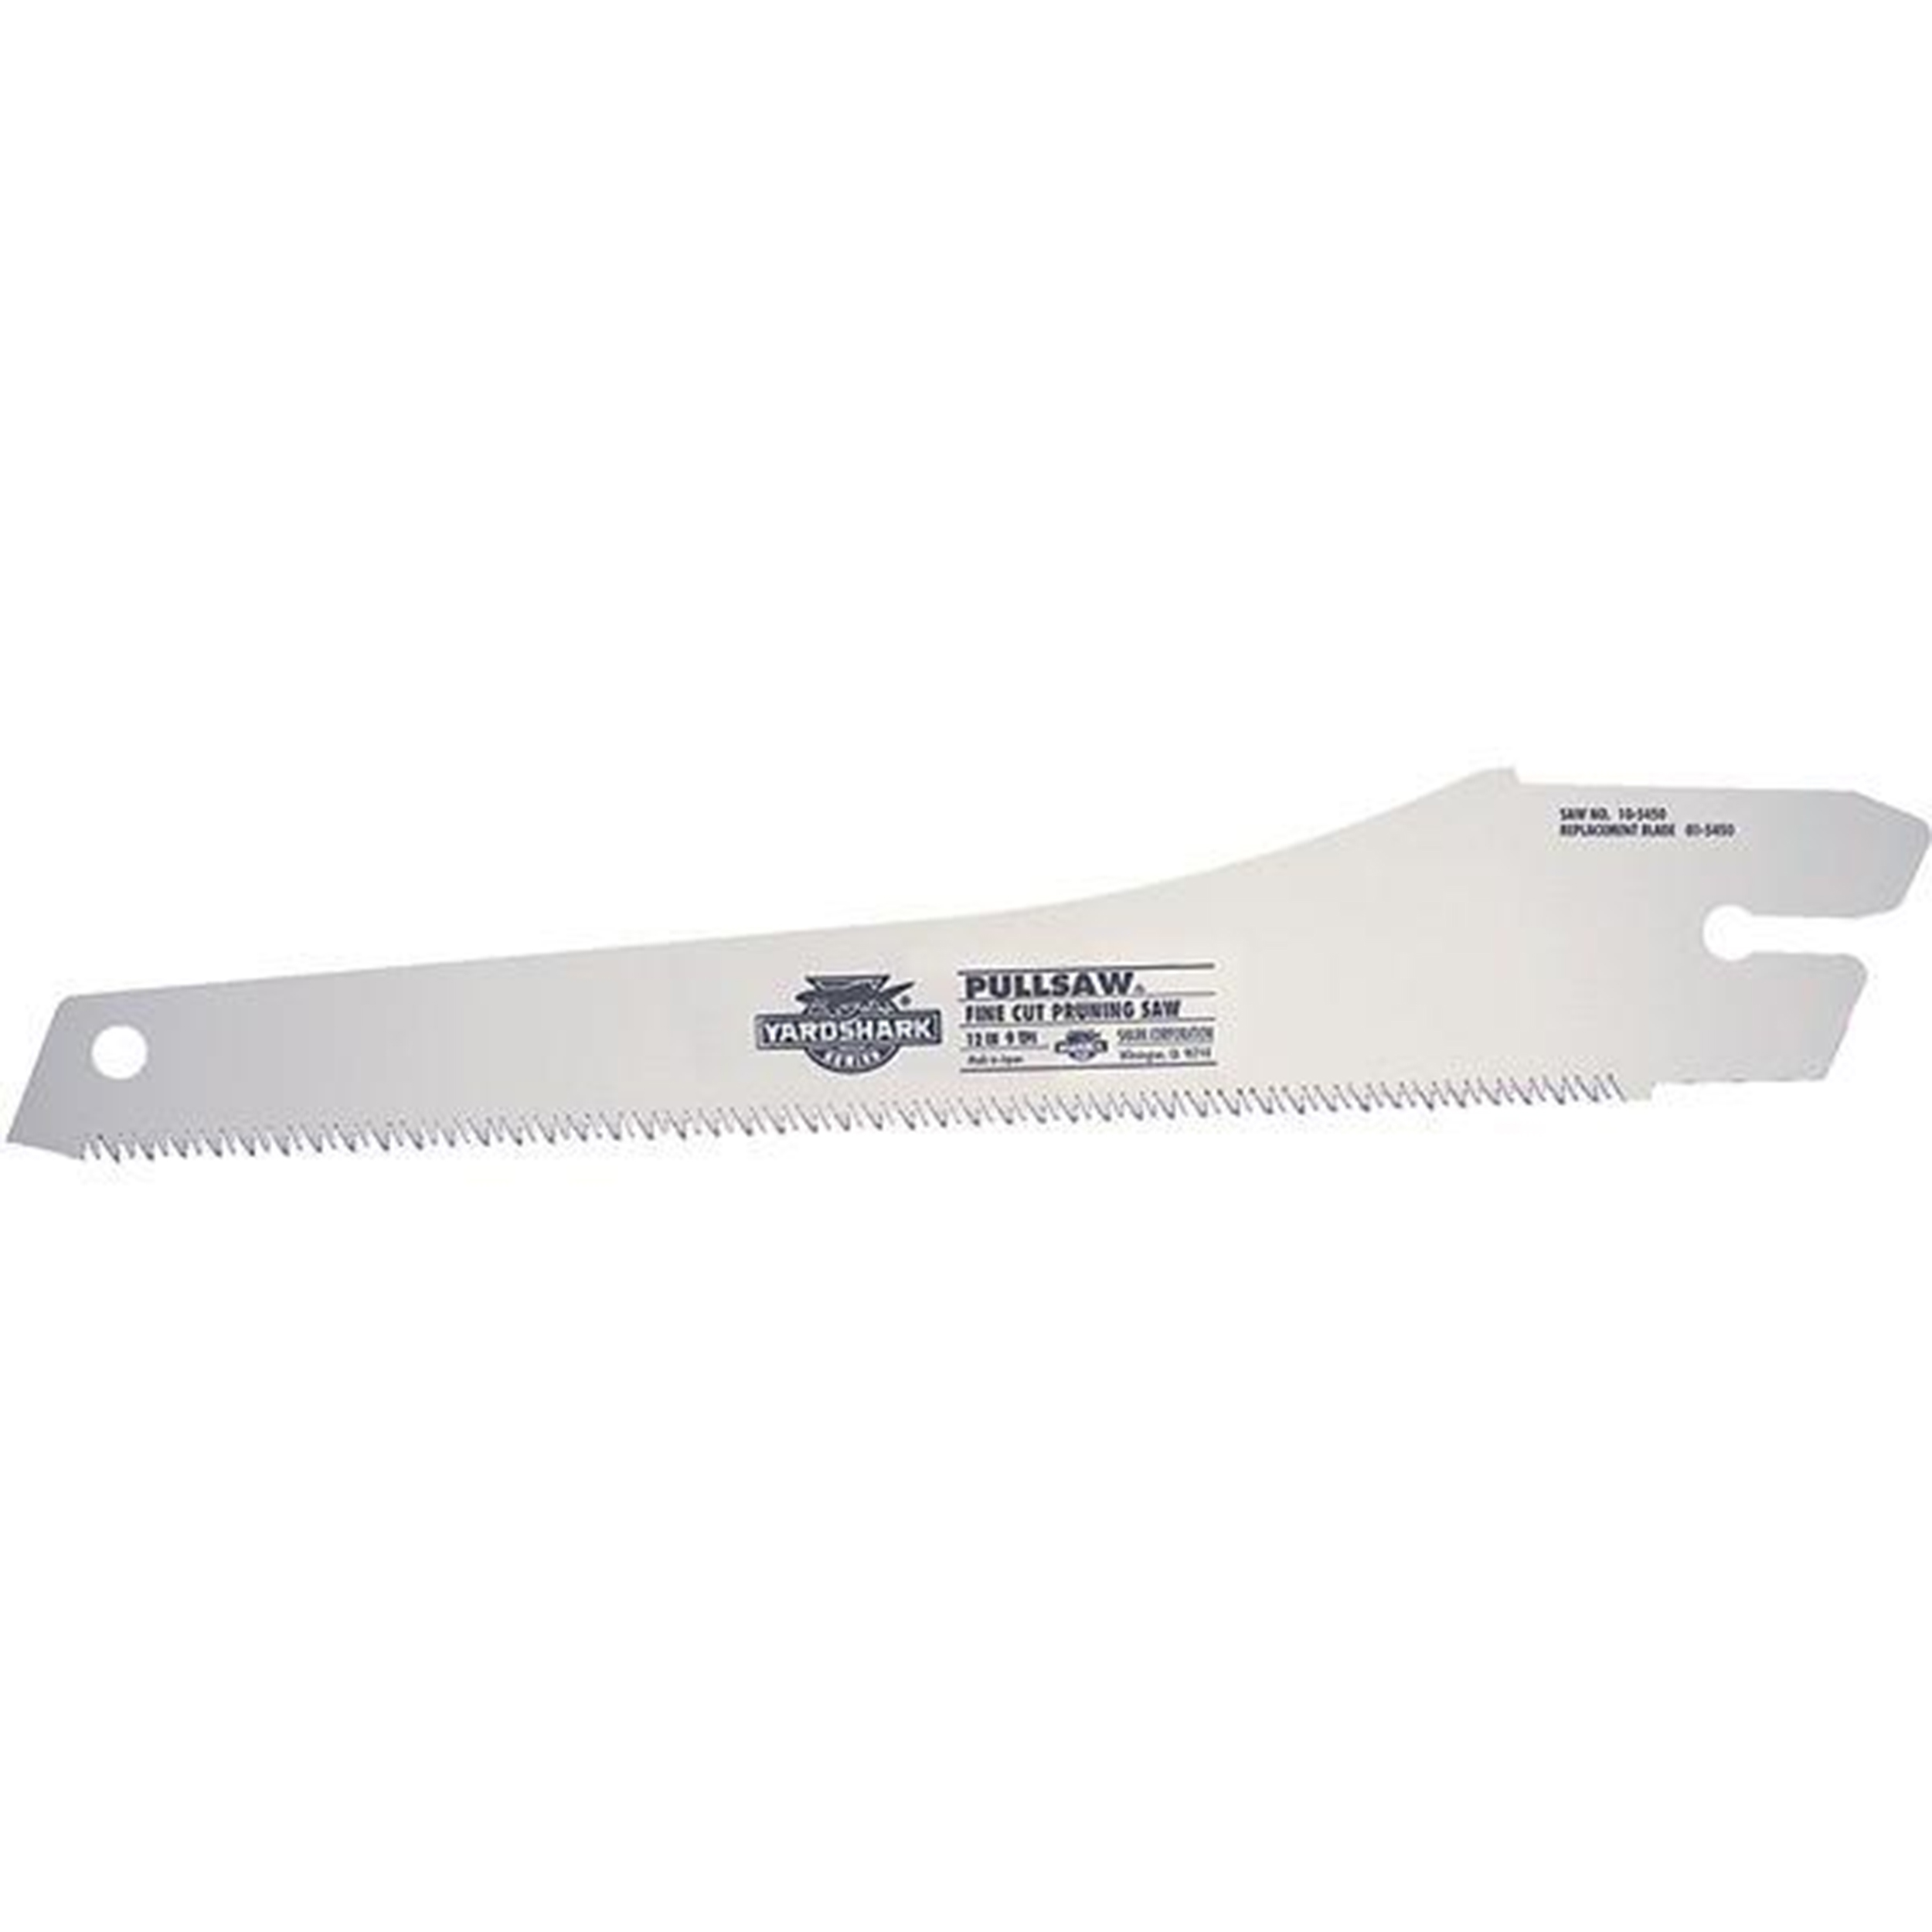 Replacement Blade 01-5450 For 12" Fine-cut Pruning Saw 10-5450